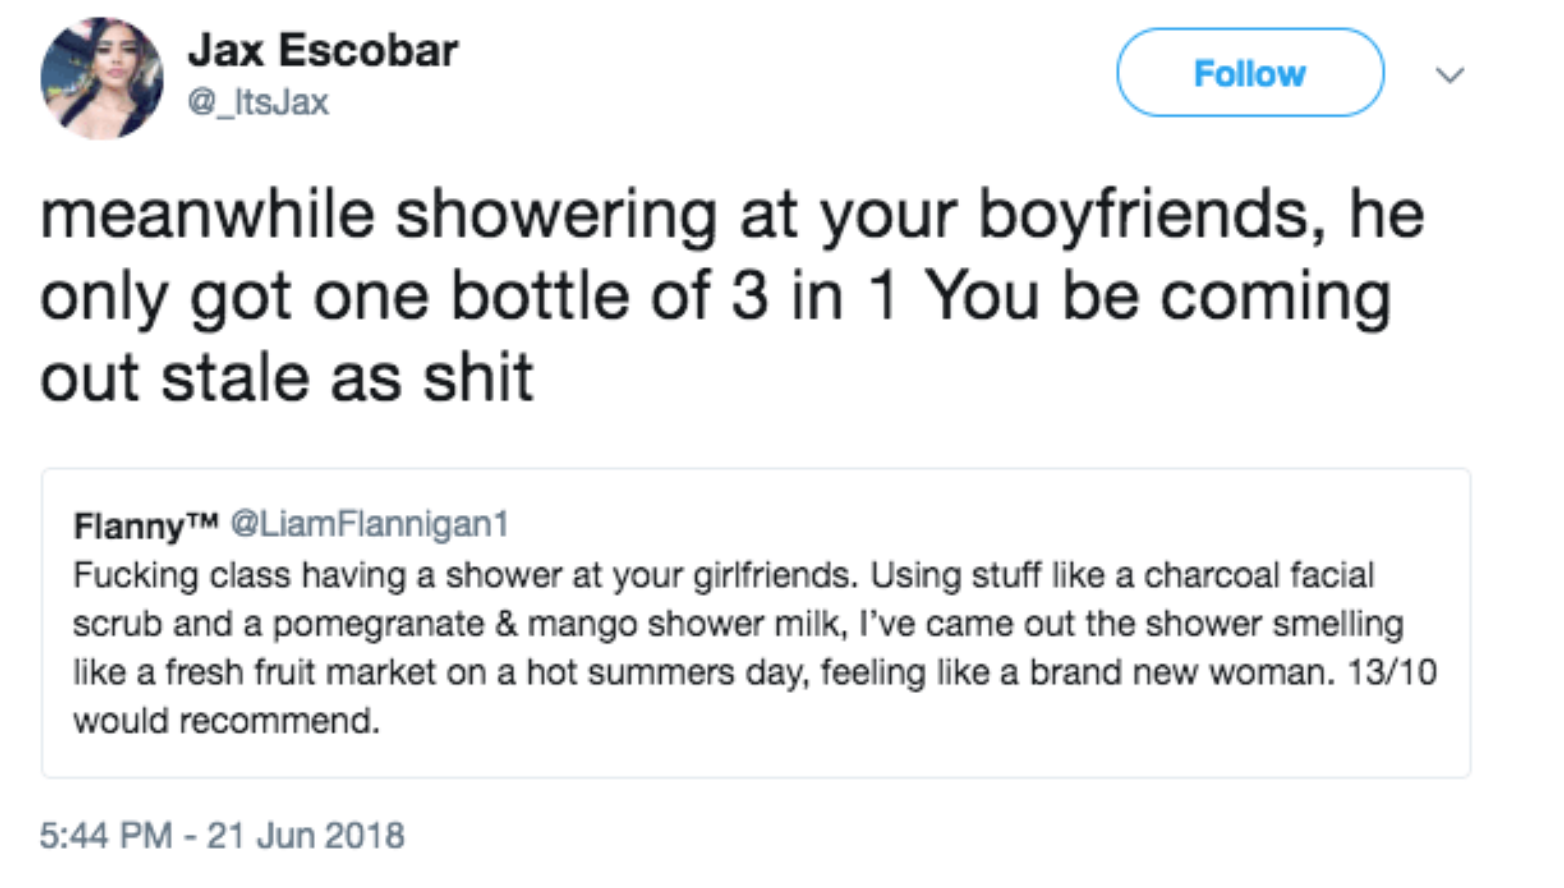 funny tweets about girlfriends - Jax Escobar v meanwhile showering at your boyfriends, he only got one bottle of 3 in 1 You be coming out stale as shit FlannyTM Flannigant Fucking class having a shower at your girlfriends. Using stuff a charcoal facial sc